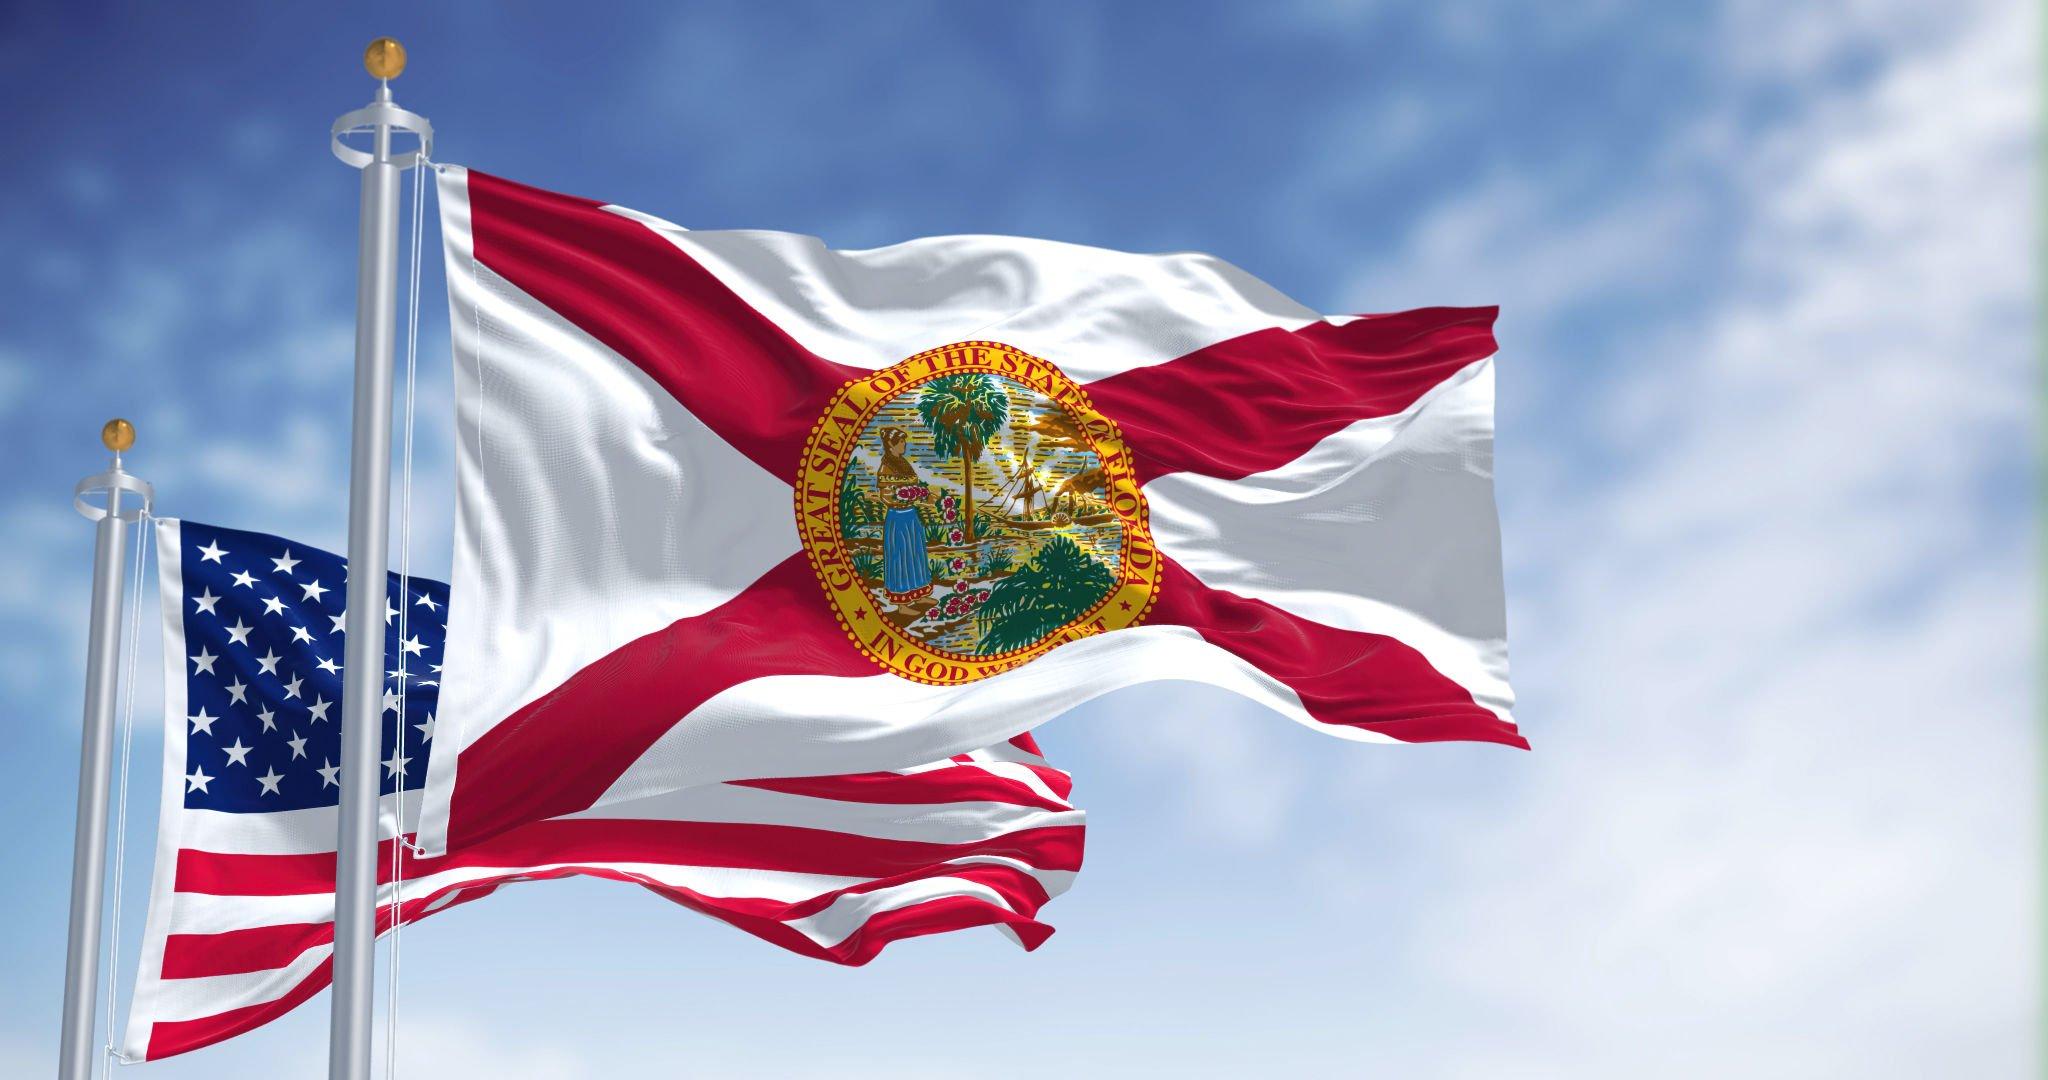 What is Florida Known For? (20 Facts It’s Famous For)